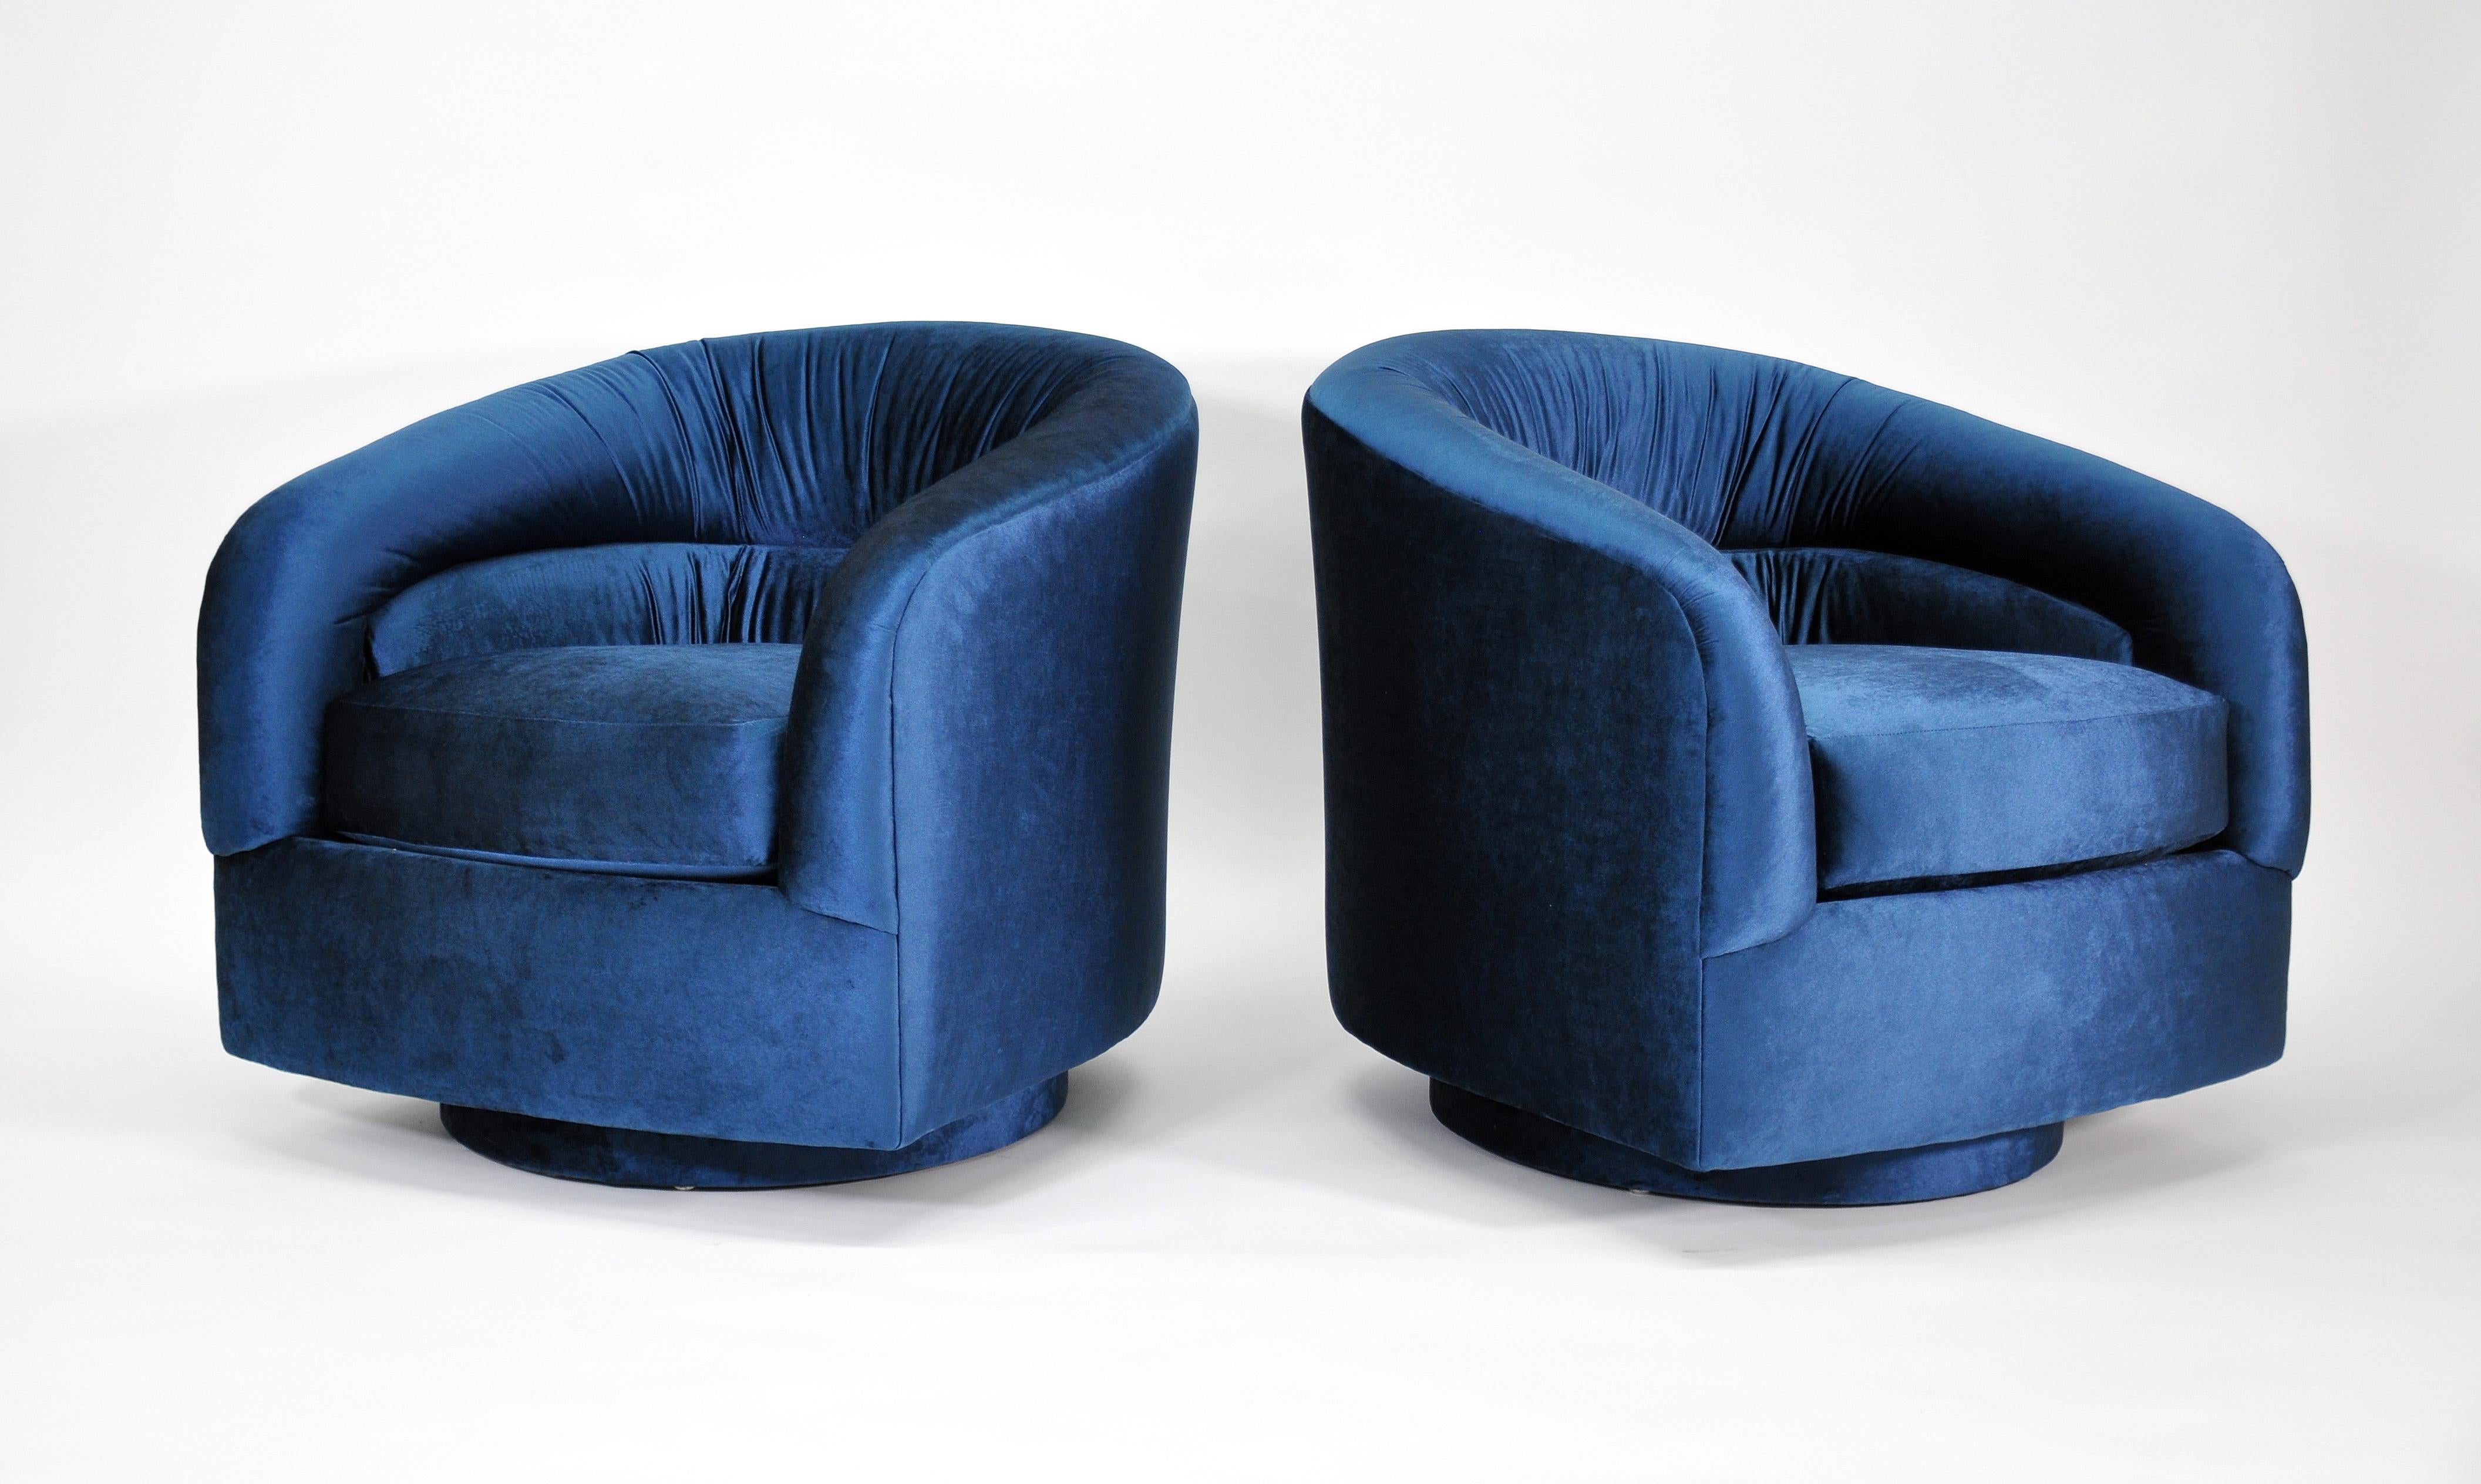 A fabulous pair of Mid-Century Modern barrel back swiveling club chairs, designed by Milo Baughman for Thayer Coggin, dating from the 1970s. Reupholstered in a luxurious and rich sapphire or navy blue jewel tone velvet, features an upholstered base